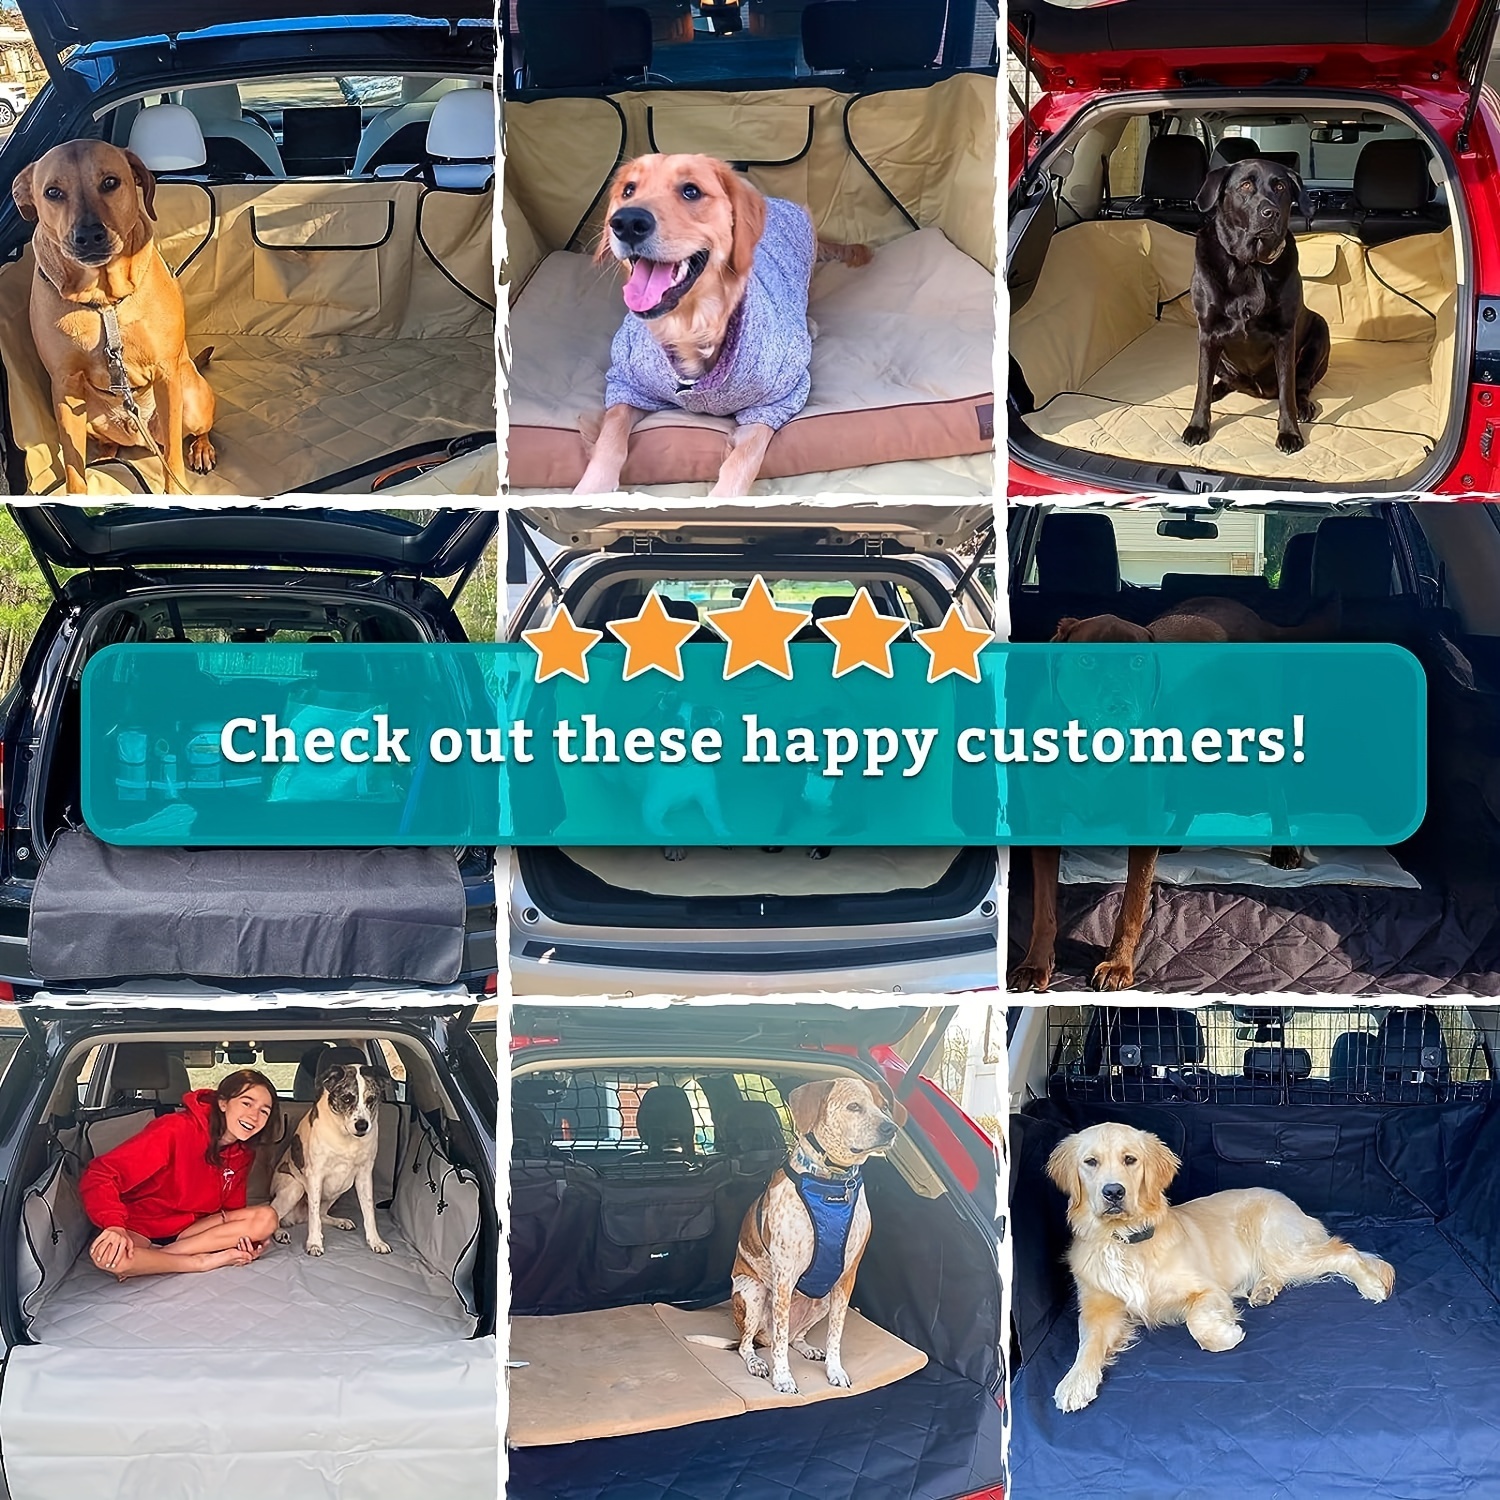 Extra Large & Thick Car Door Protector From Dog Scratching,Interior Car  Door Covers For Dogs with Large Suction Cups,Waterproof Vehicle Door